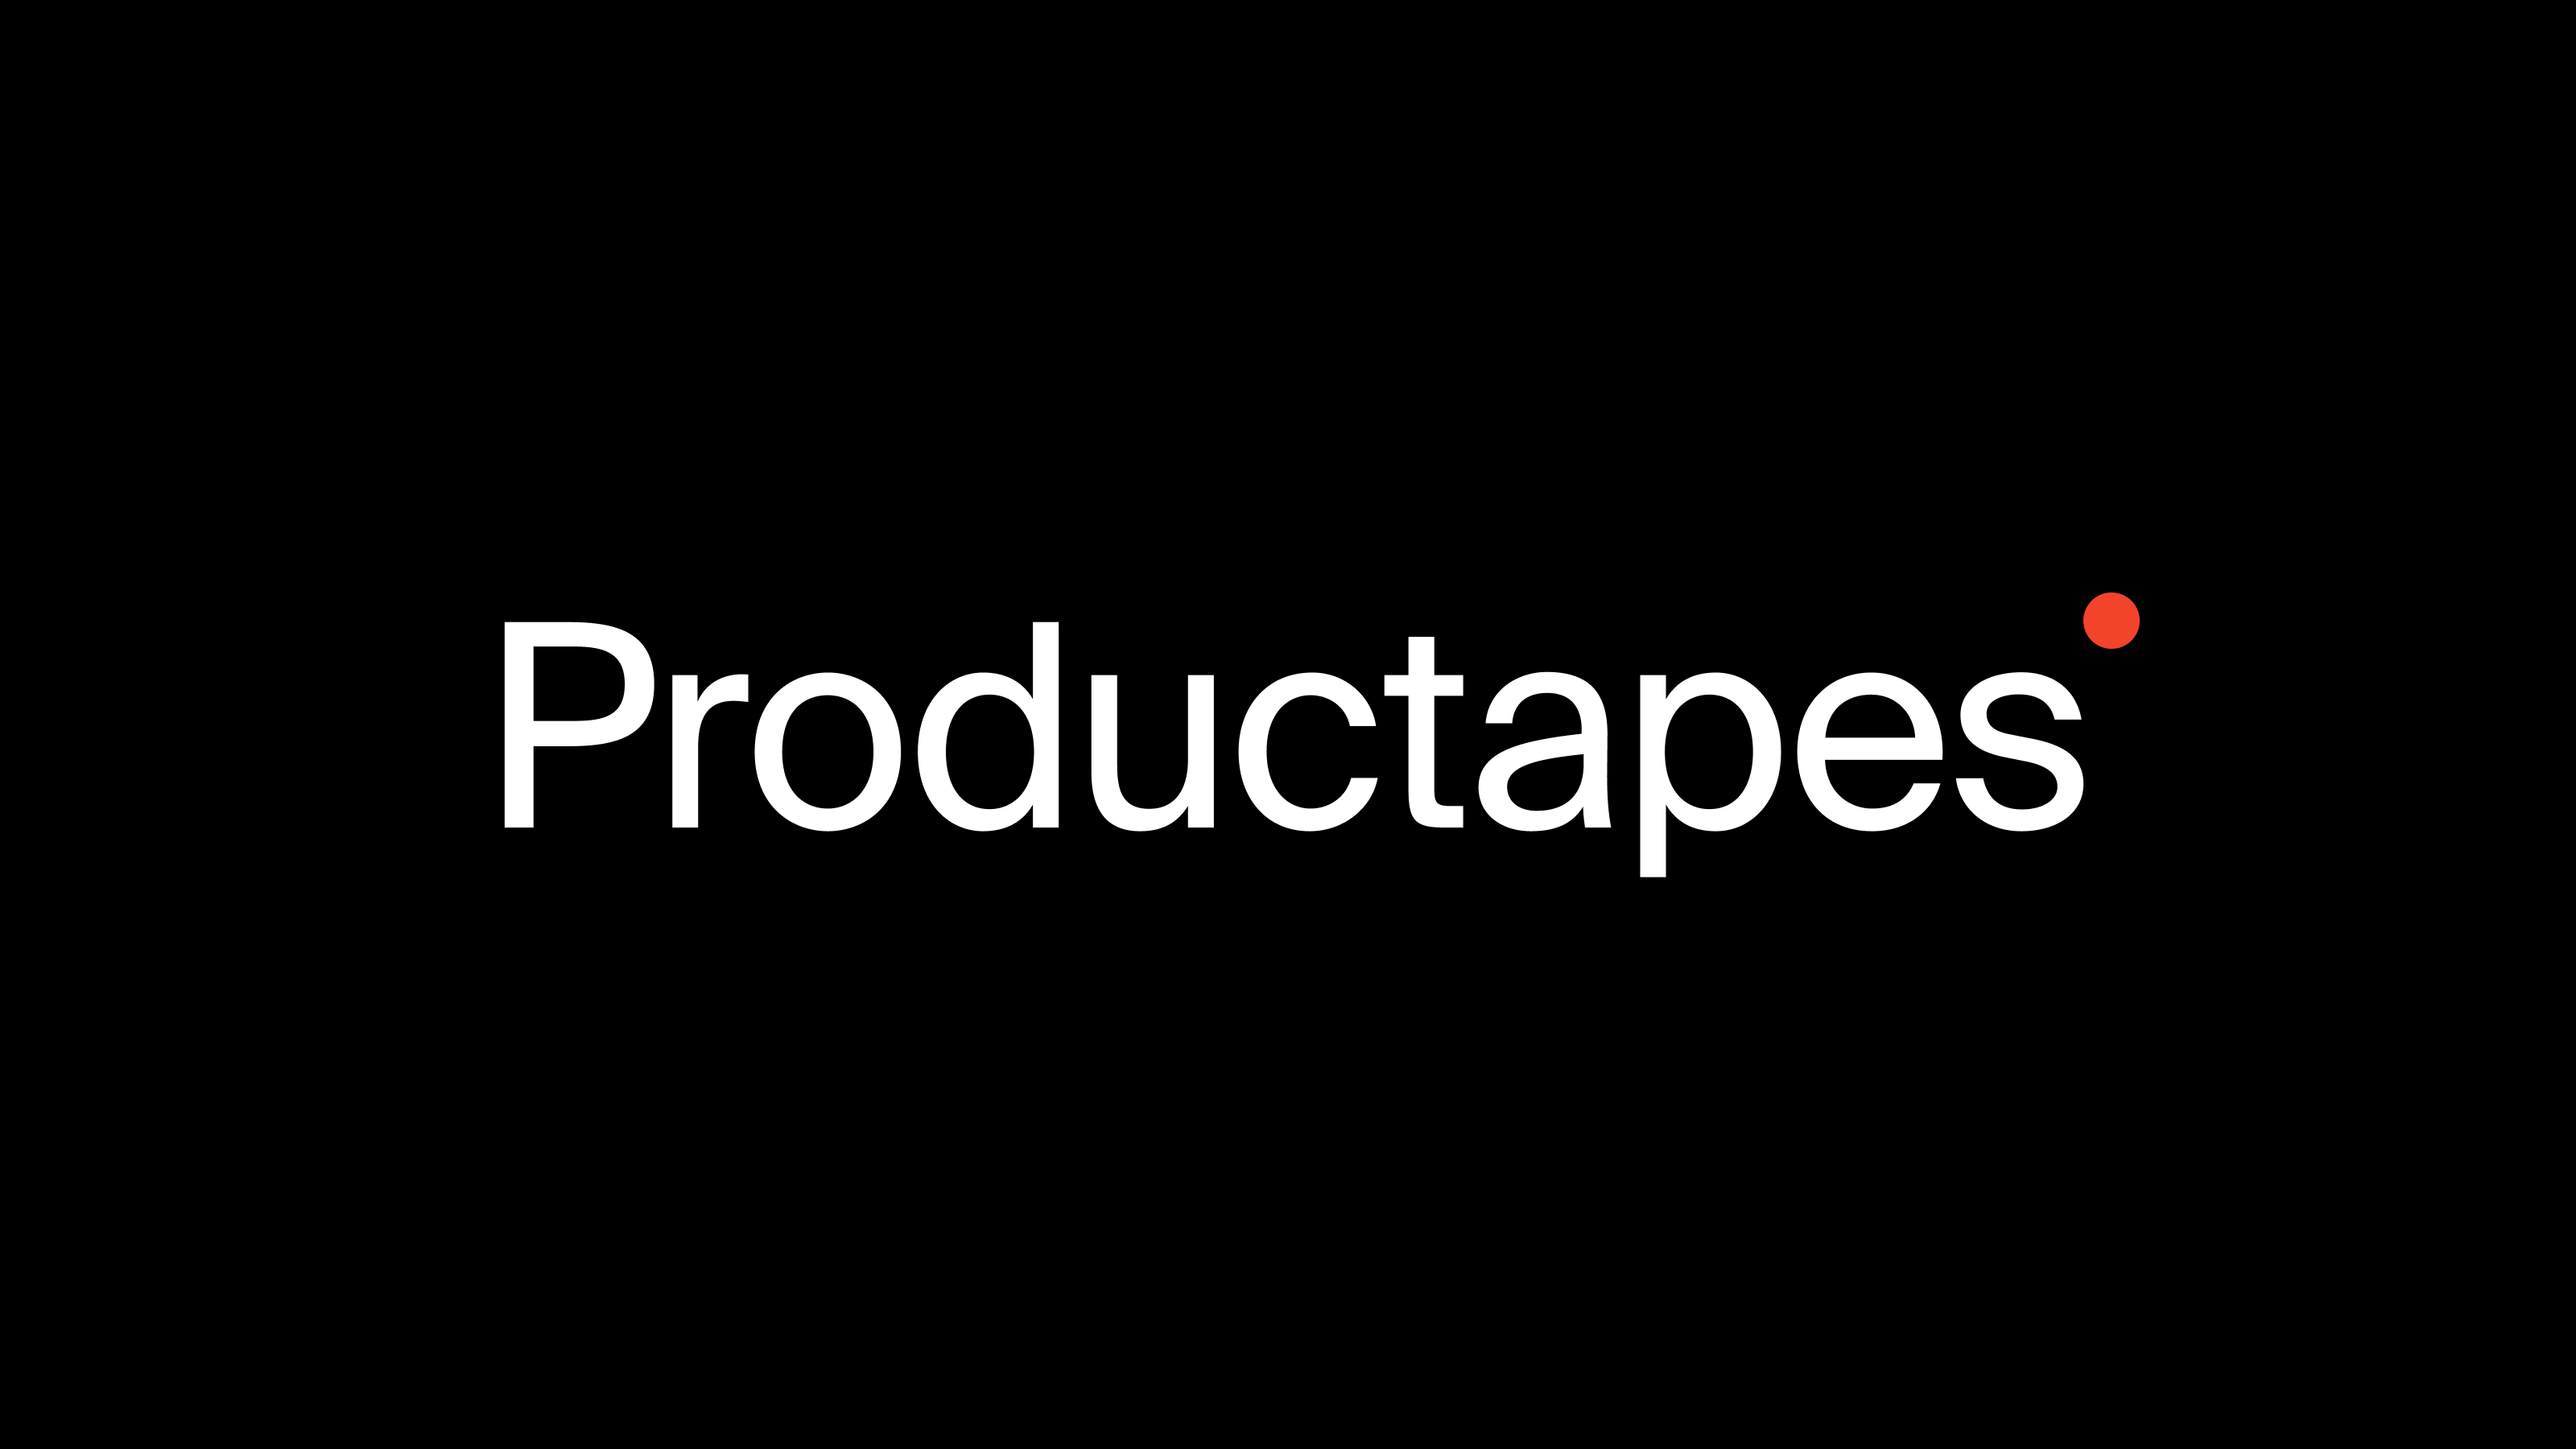 Productapes